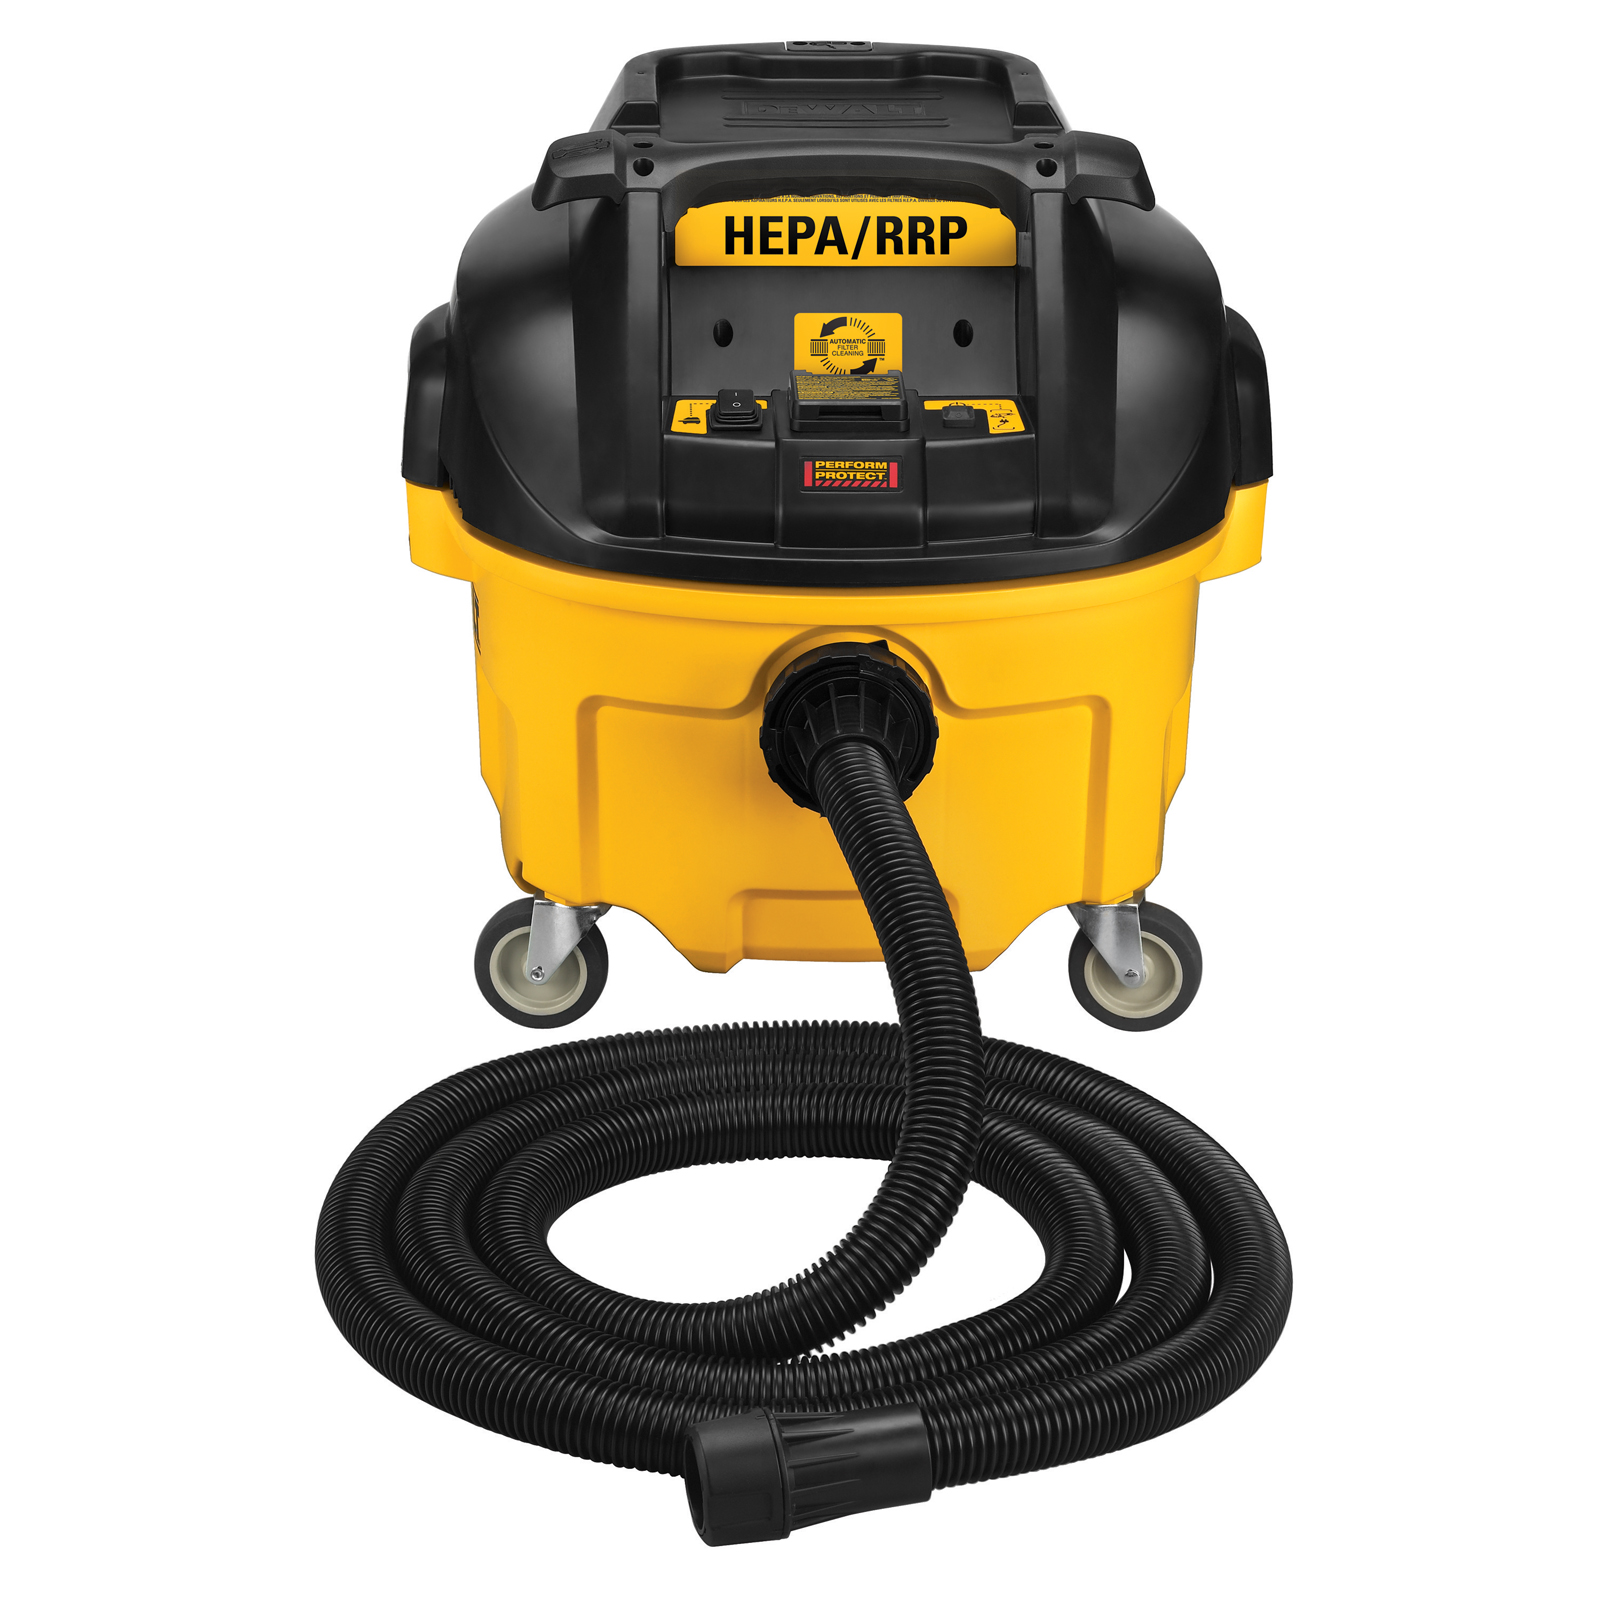 DeWalt DWV010 HEPA Dust Extractor with Automatic Filter Cleaning, 8-Gallon